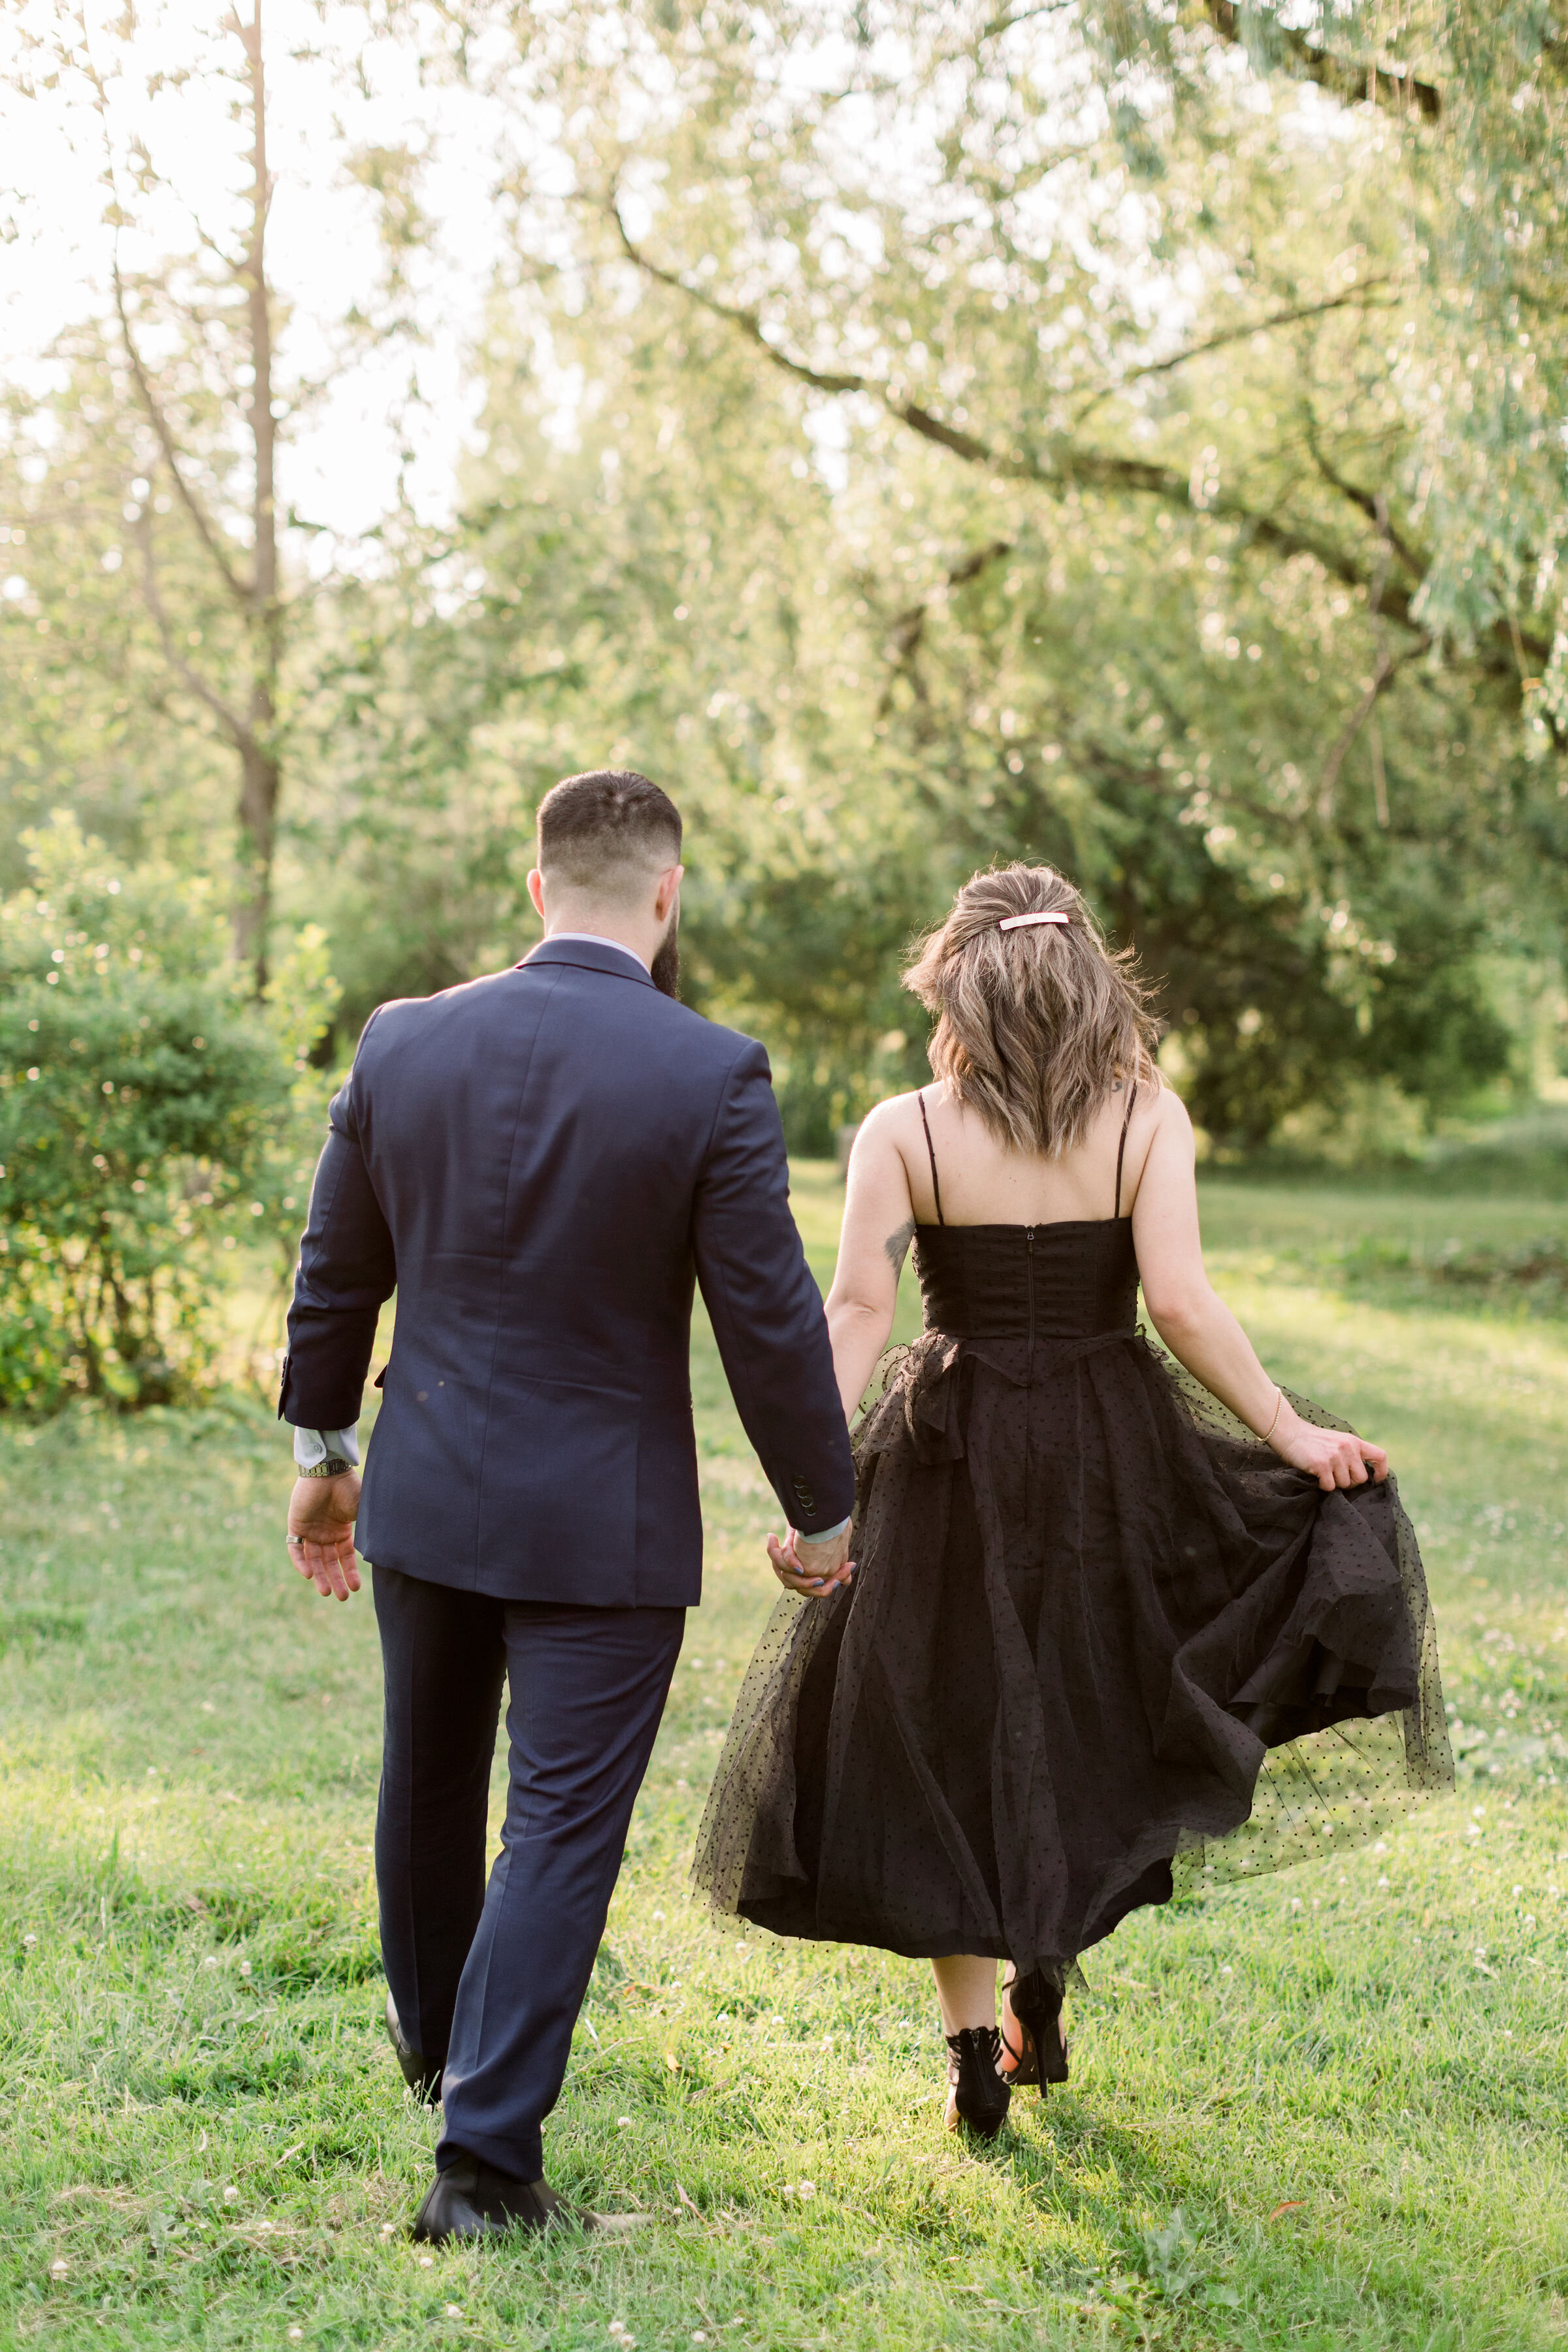  While walking through a shaded grassy park, Ottawa, Ontario photographer, Chelsea Mason Photography captures this formally dressed engaged couple holding hands. engaged couple holding hands formal black tie engagement photos womens black tea length 